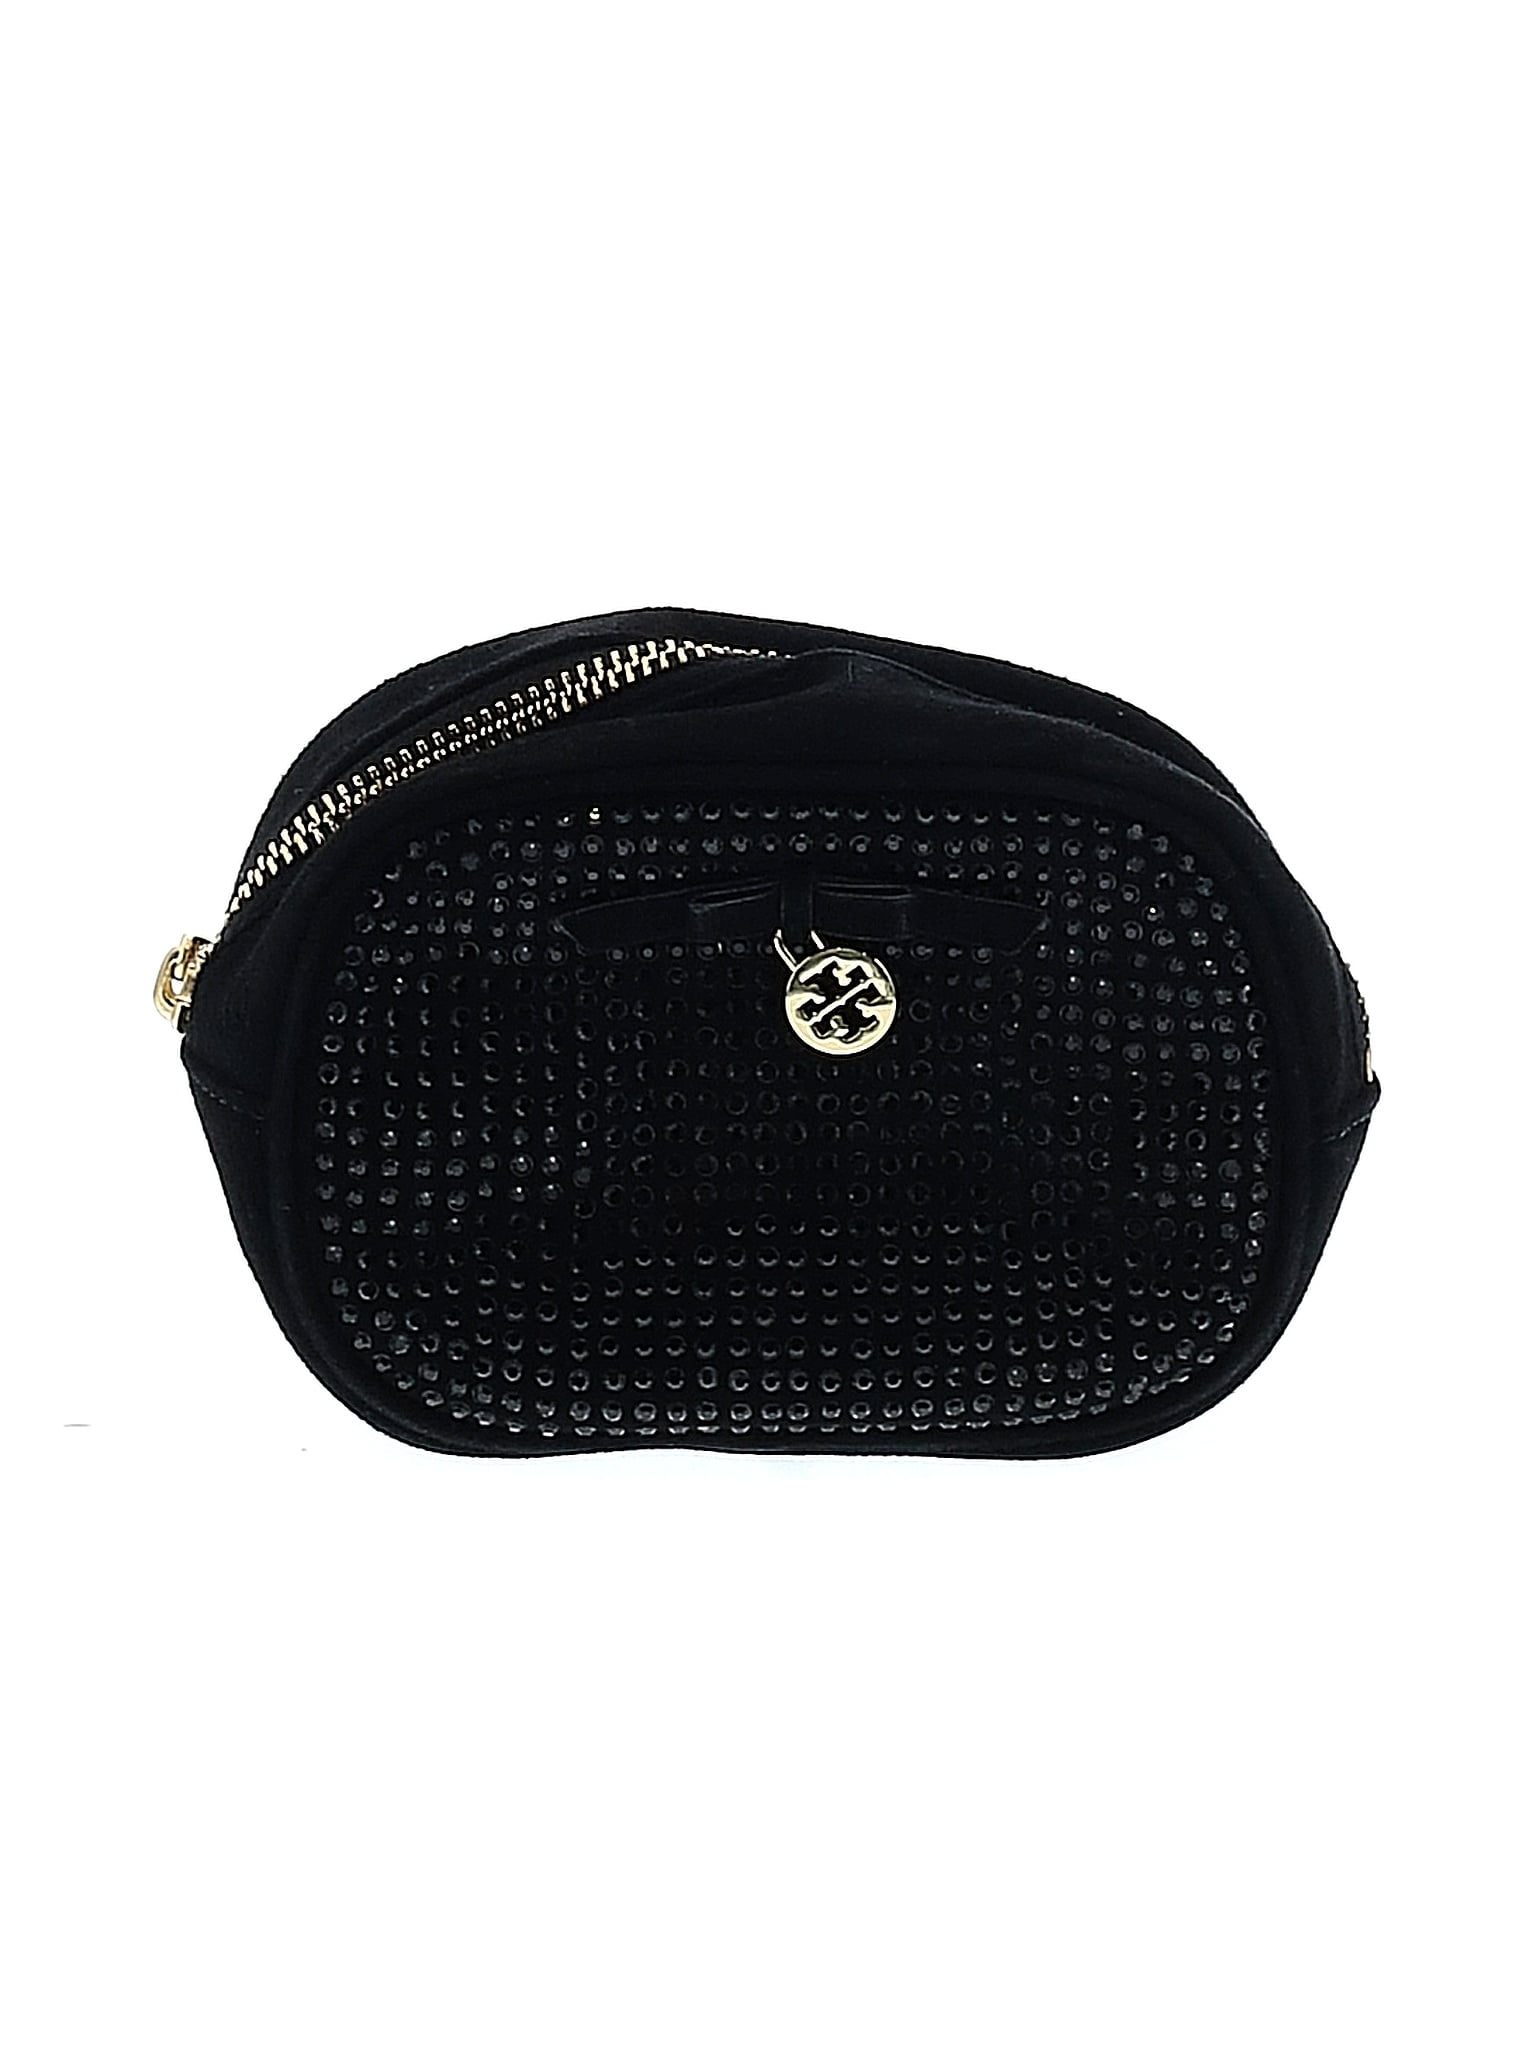 Pre-Owned Tory Burch Women's One Size Fits All Clutch 